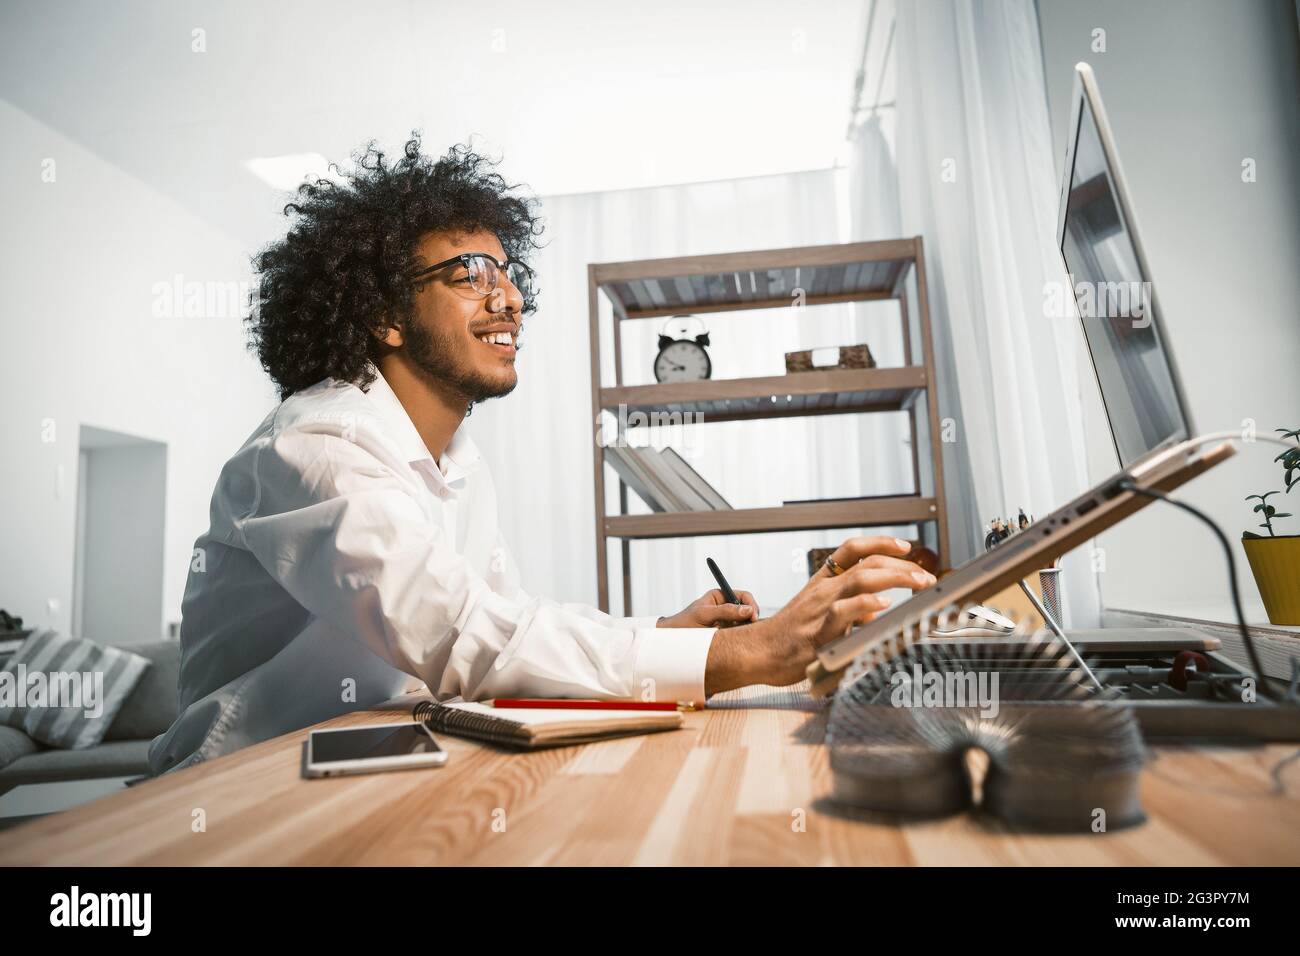 Inspired designer working on computer with new project. Young freelance man works on laptop sitting at home workplace. Side view Stock Photo